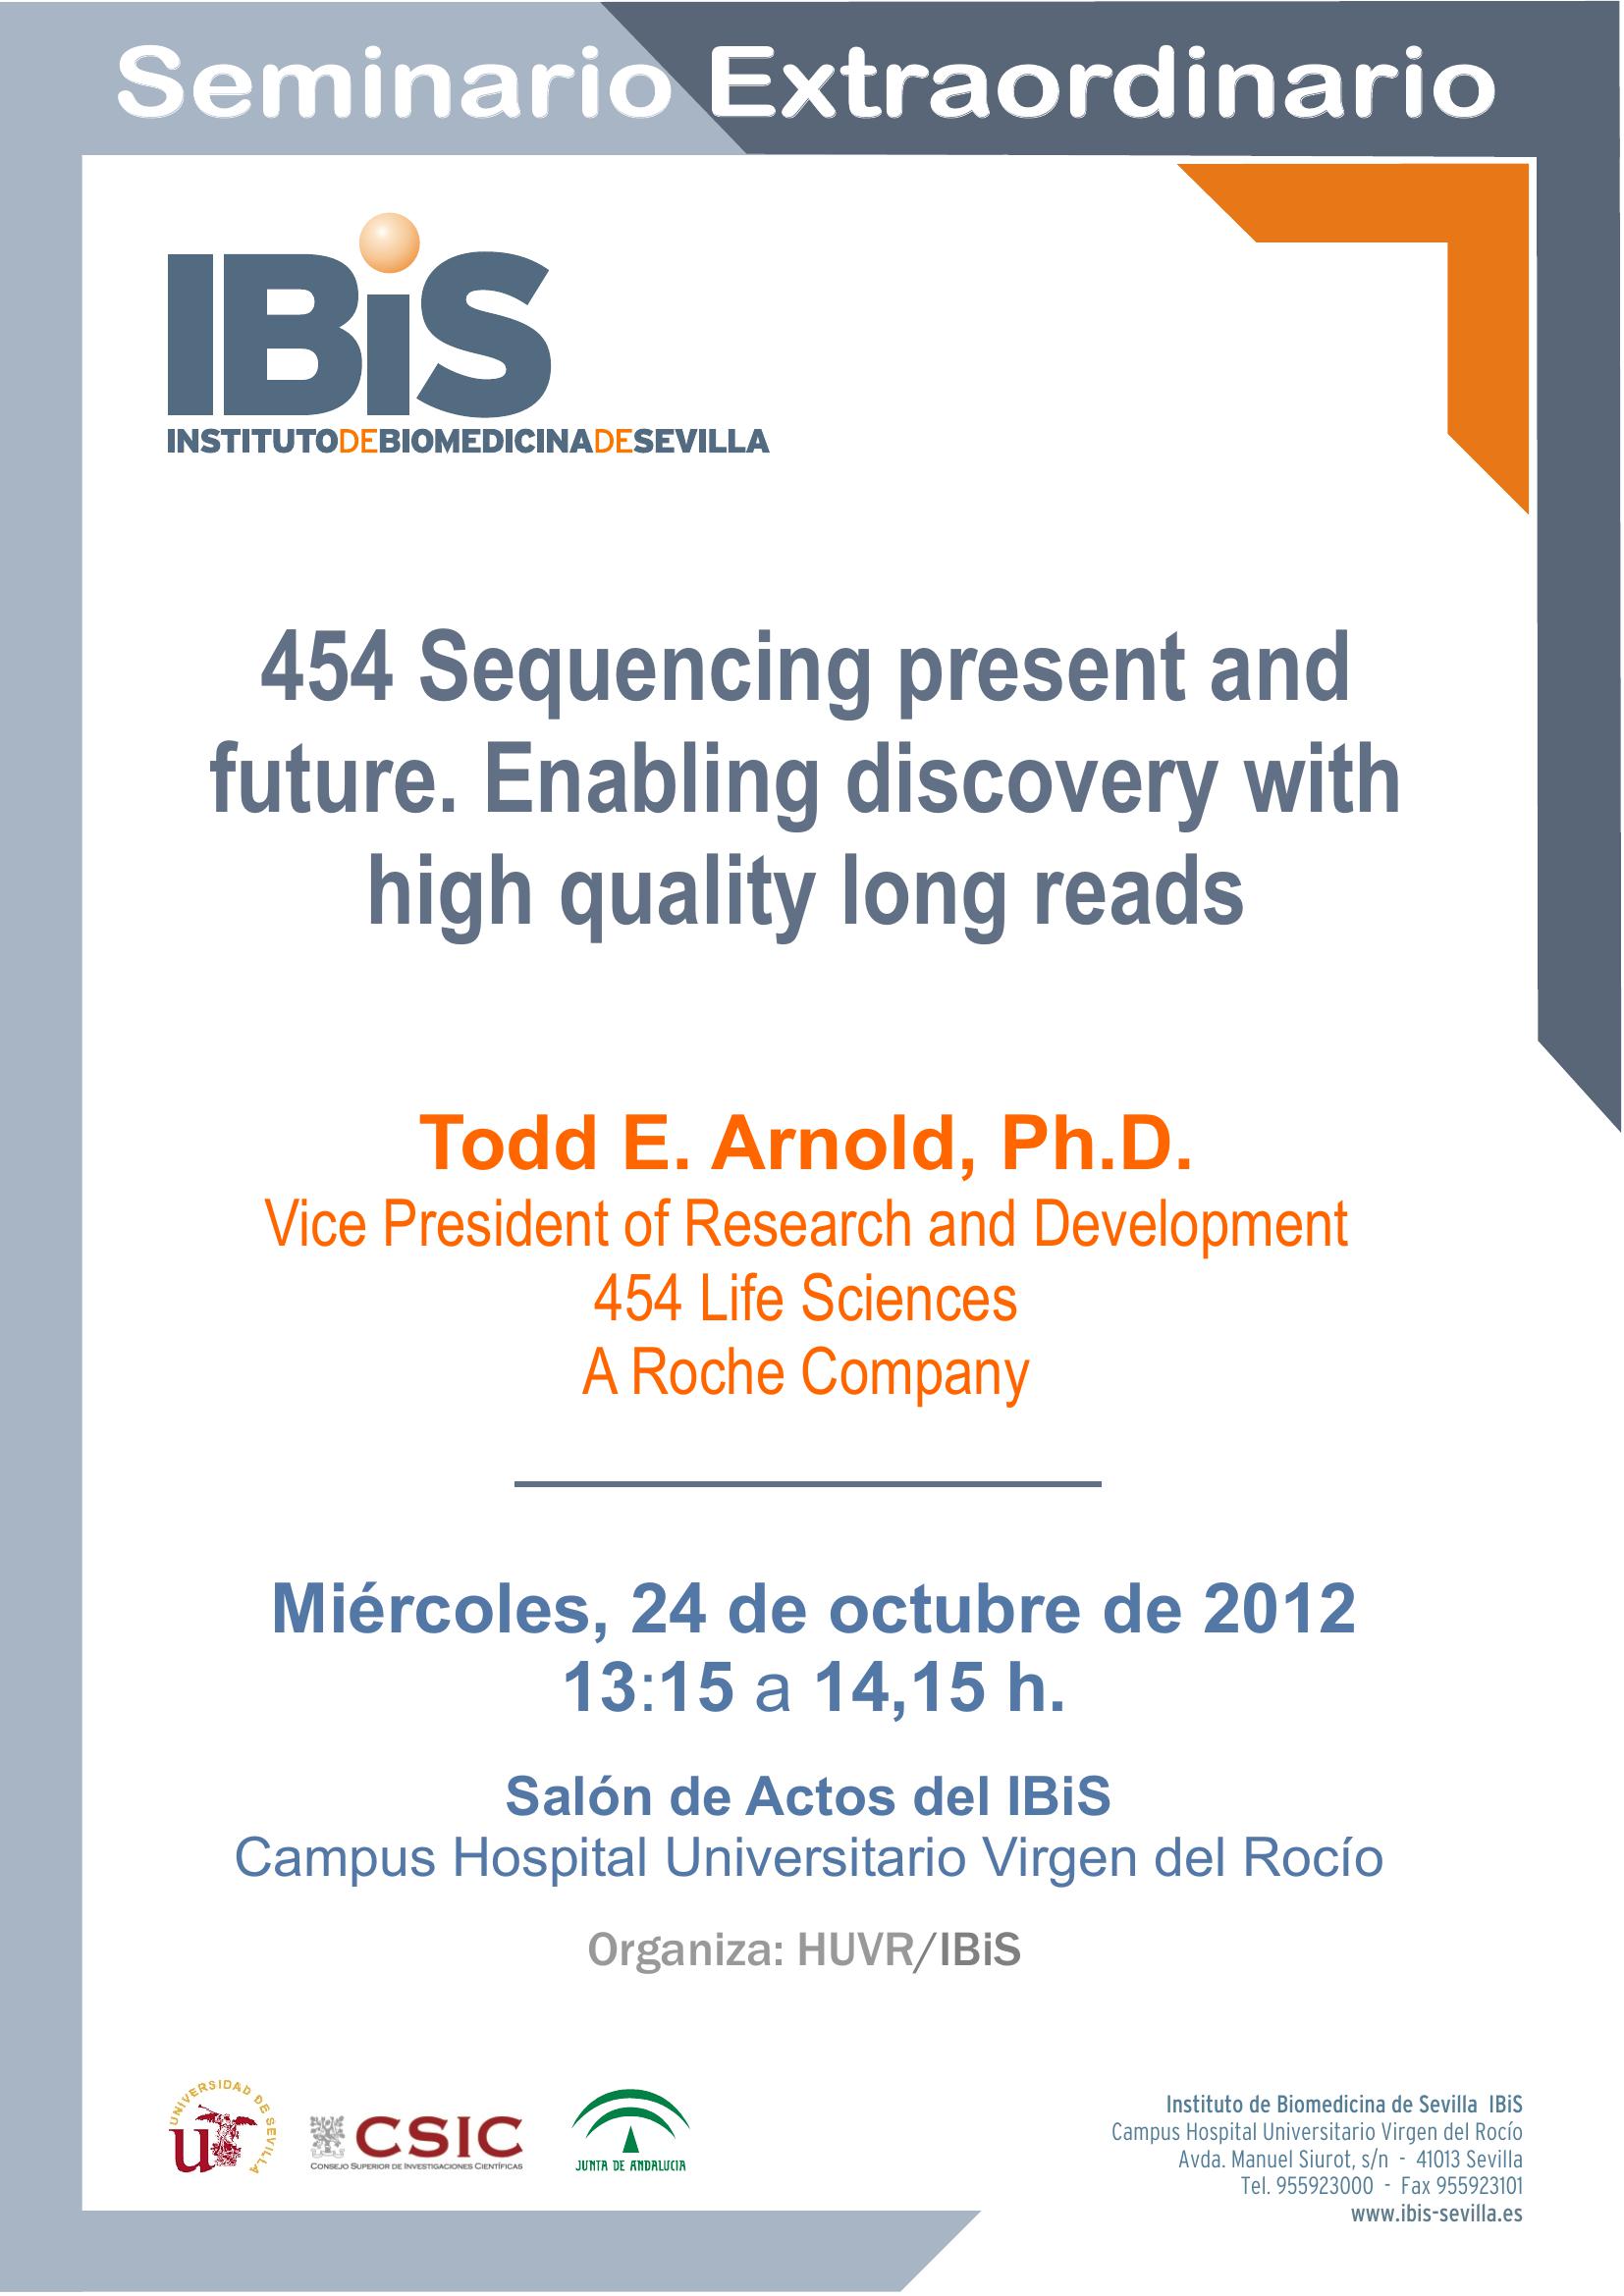 Poster: 454 Sequencing present and future. Enabling discovery with high quality long reads.